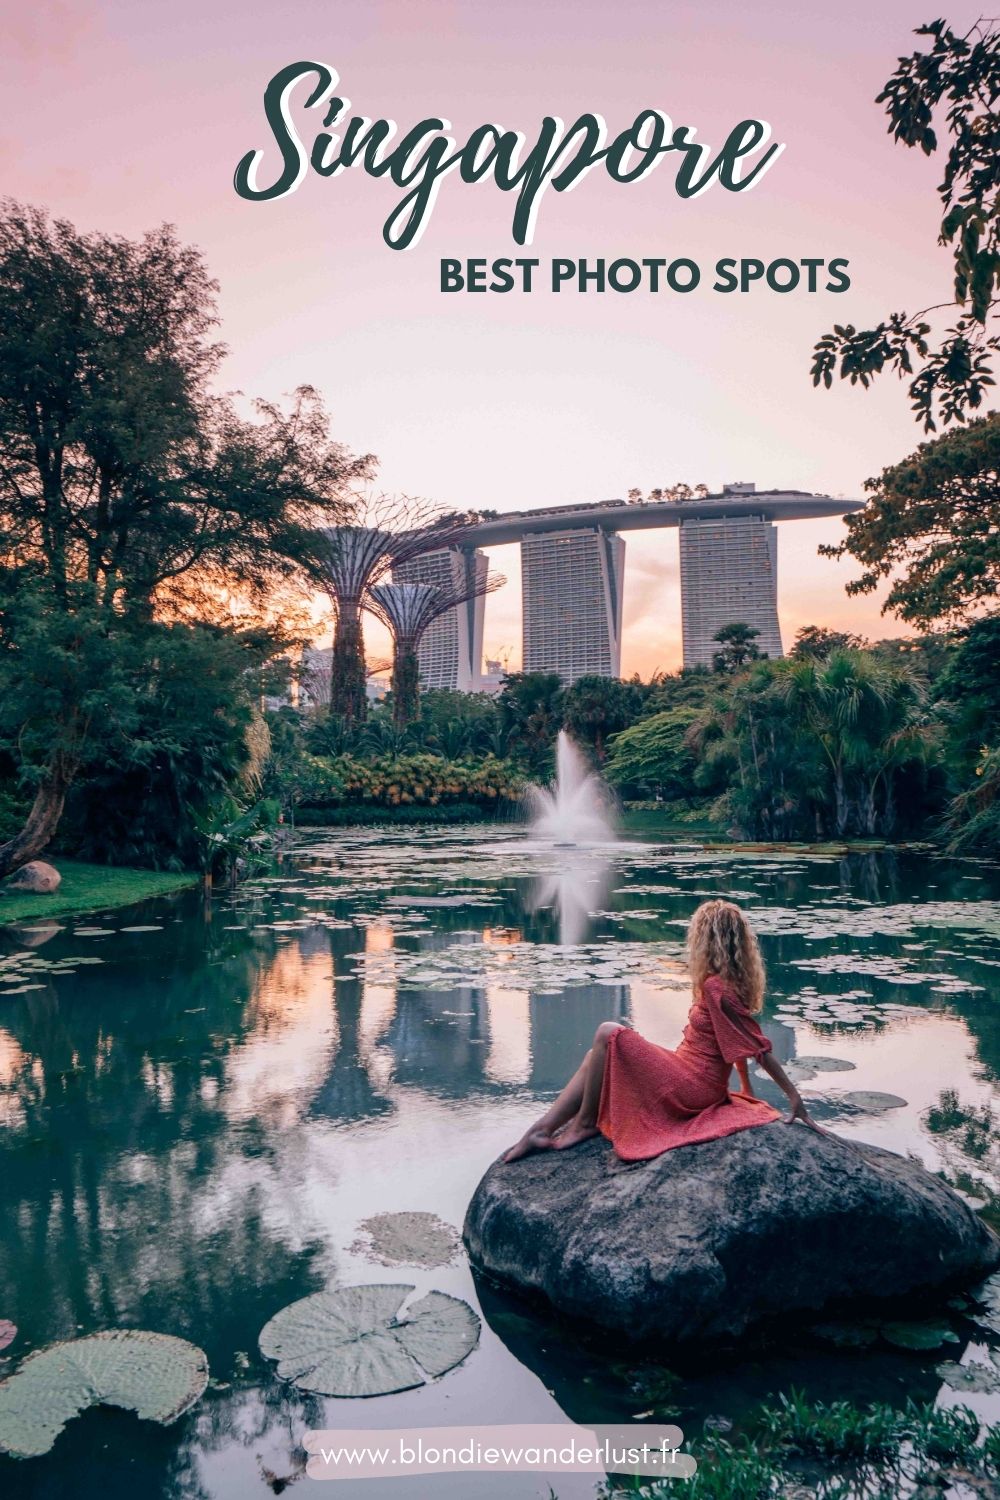 Discover the best photo spots in Singapore